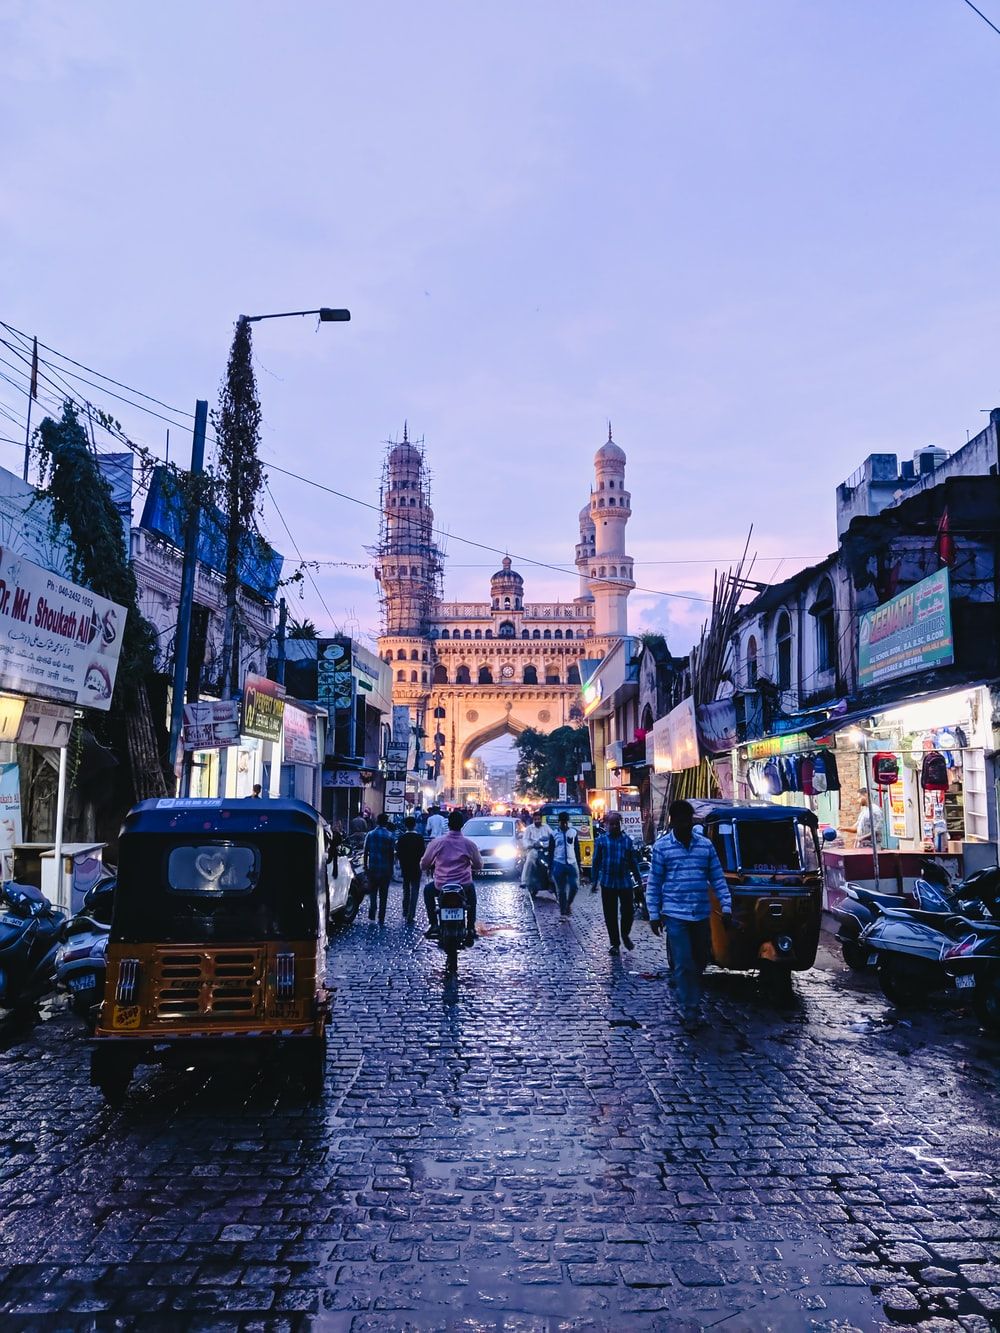 Charminar, Hyderabad, India Picture. Download Free Image